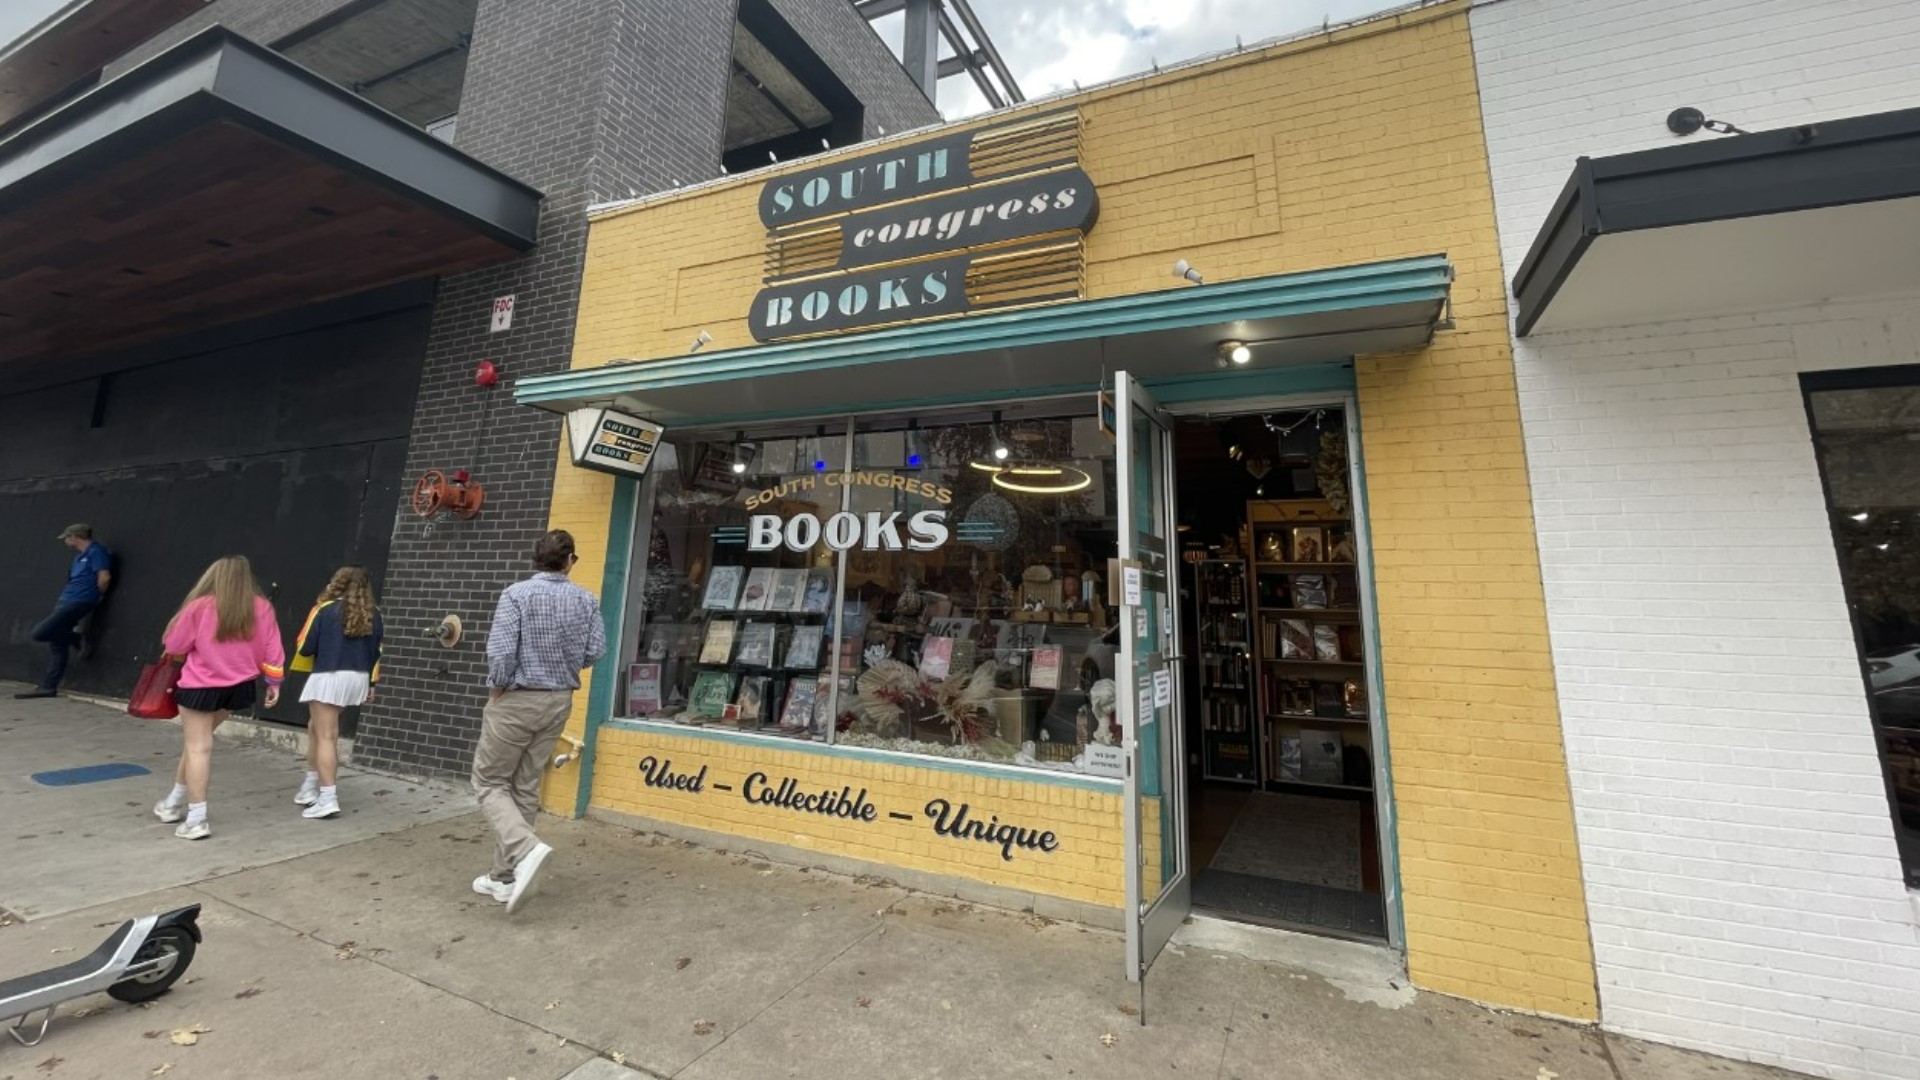 For many, South Congress Books kept a local flare alive on the popular street. But after newly announced rent increases, the store is being priced out.